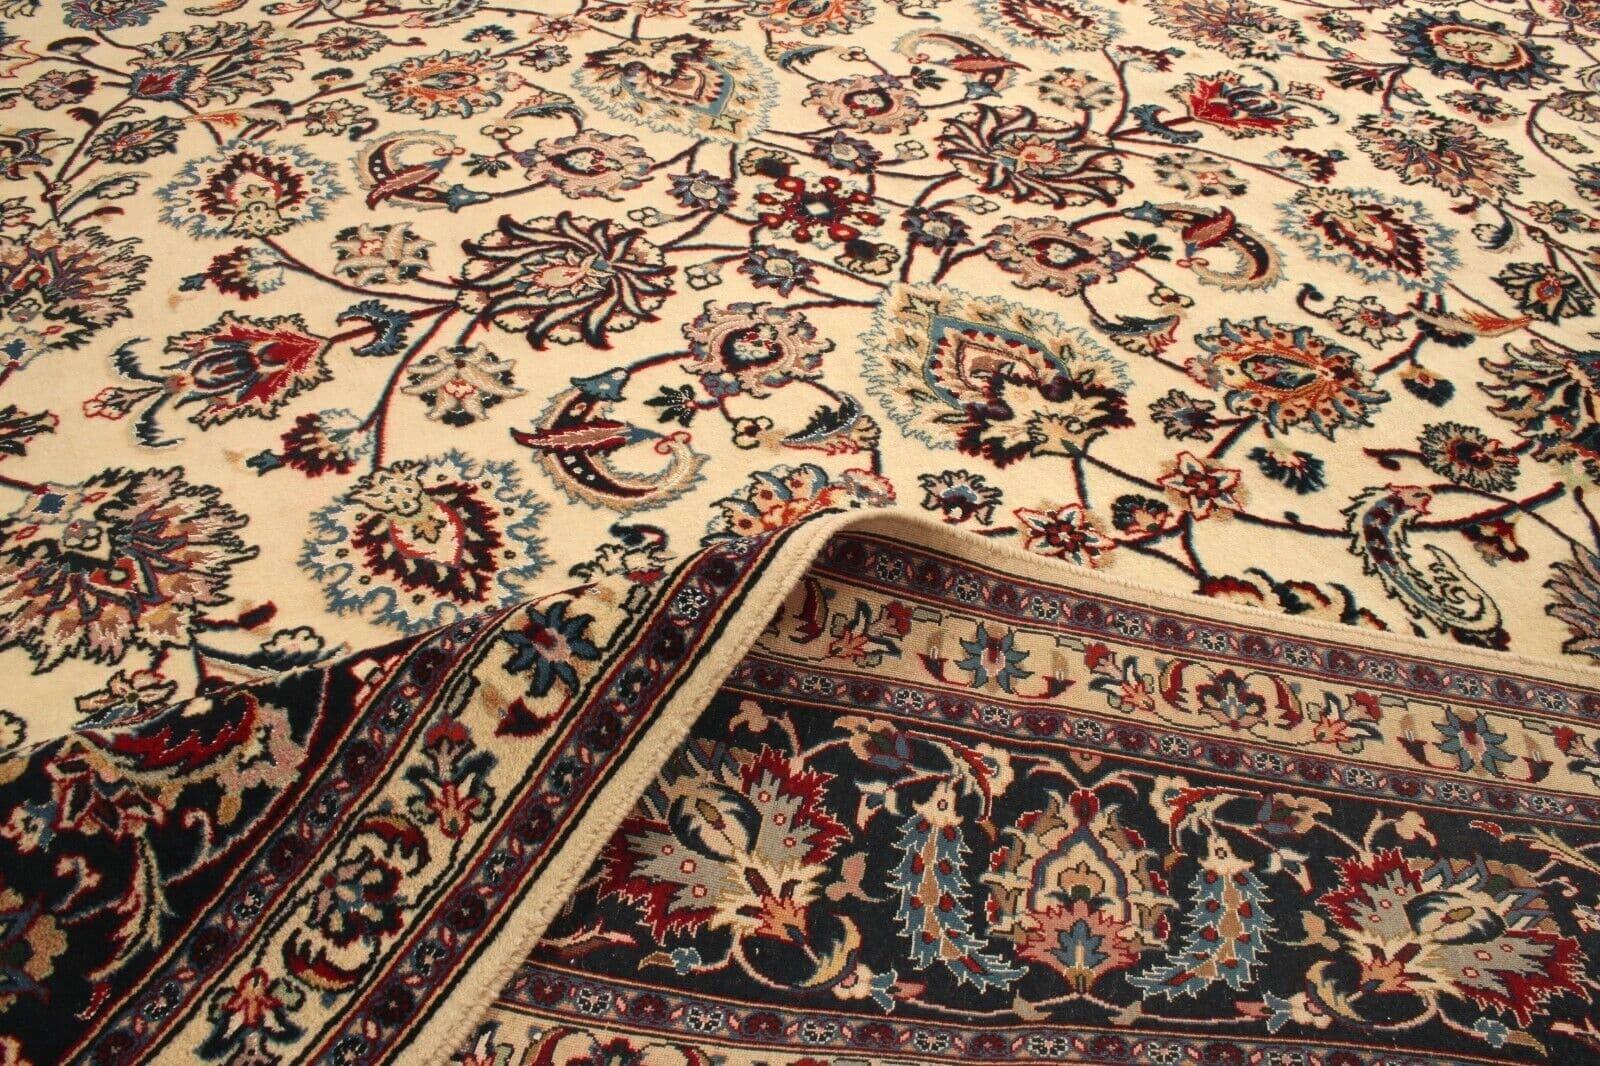 Handmade Contemporary Persian Style Tabriz Rug 10' x 12.7', 2000s - 1T04 For Sale 7